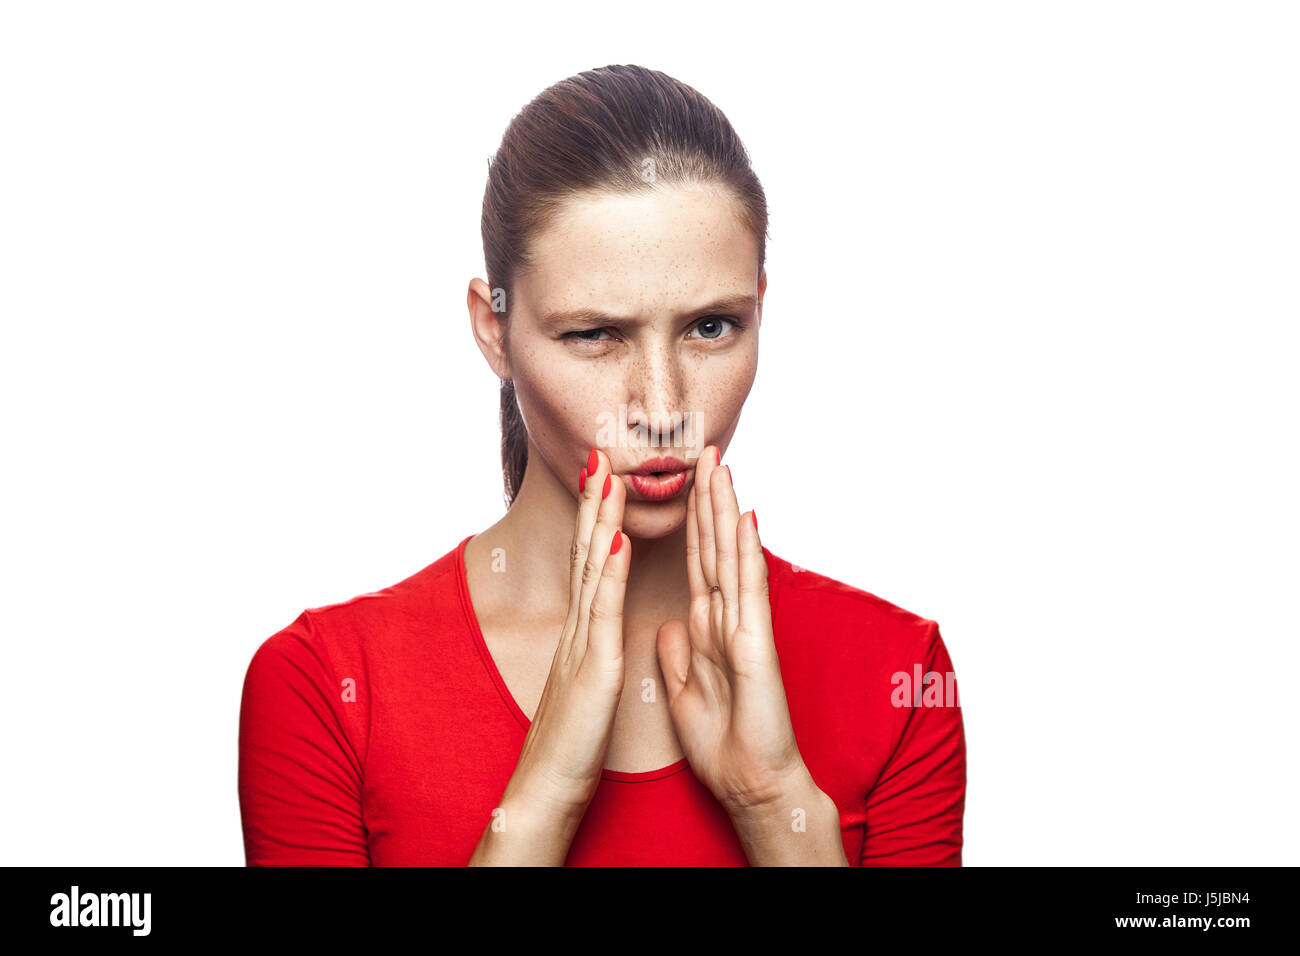 Portrait of serious woman in red t-shirt with freckles. looking at camera and telling secret, studio shot. isolated on white background. Stock Photo